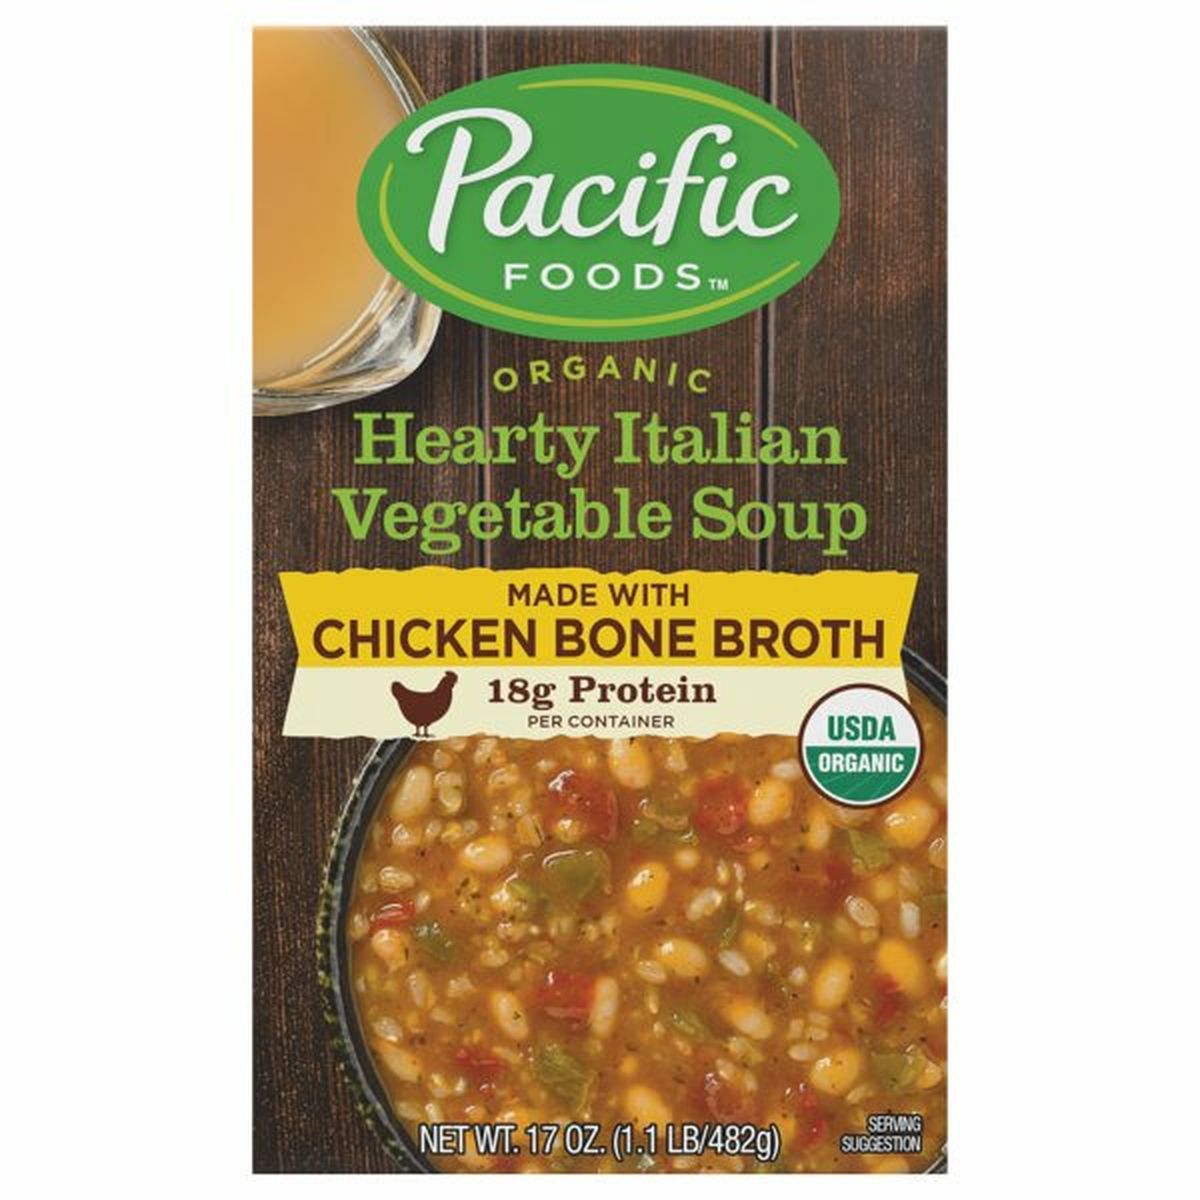 Calories in Pacific Soup, Organic, Hearty Italian Vegetable